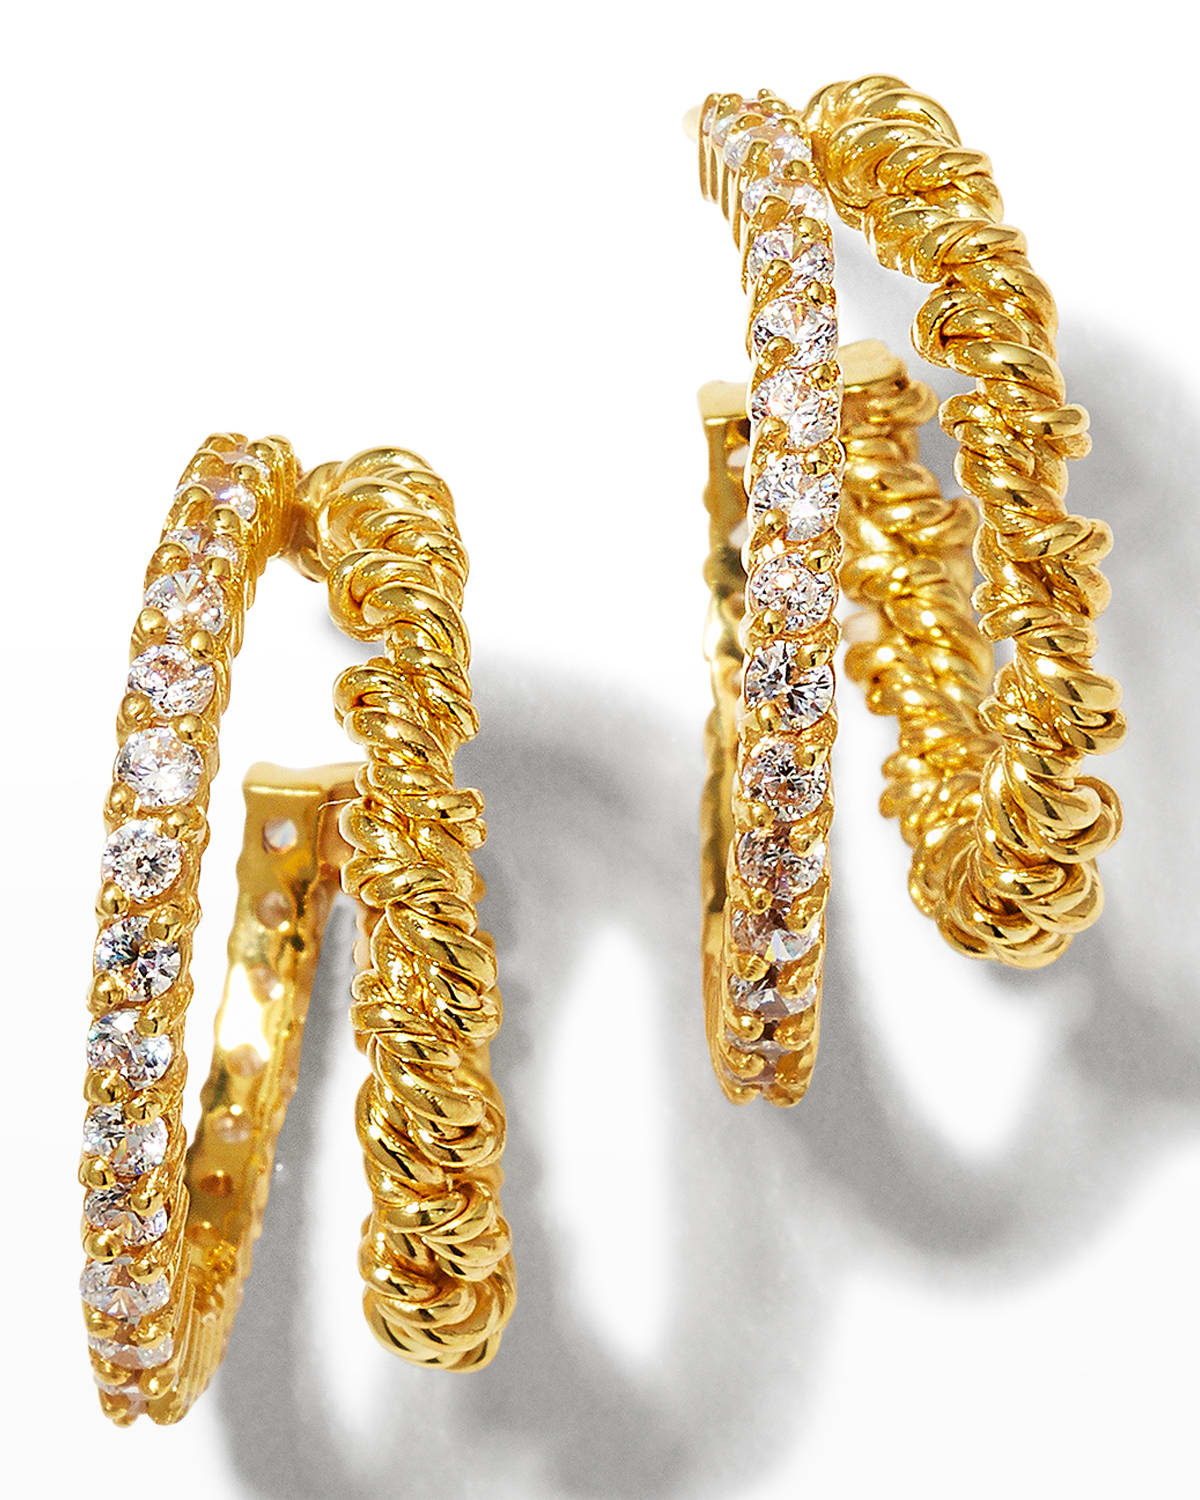 Joanna Laura Constantine Gold Plated Twisted Wire Hoop Earrings with Pave Stones